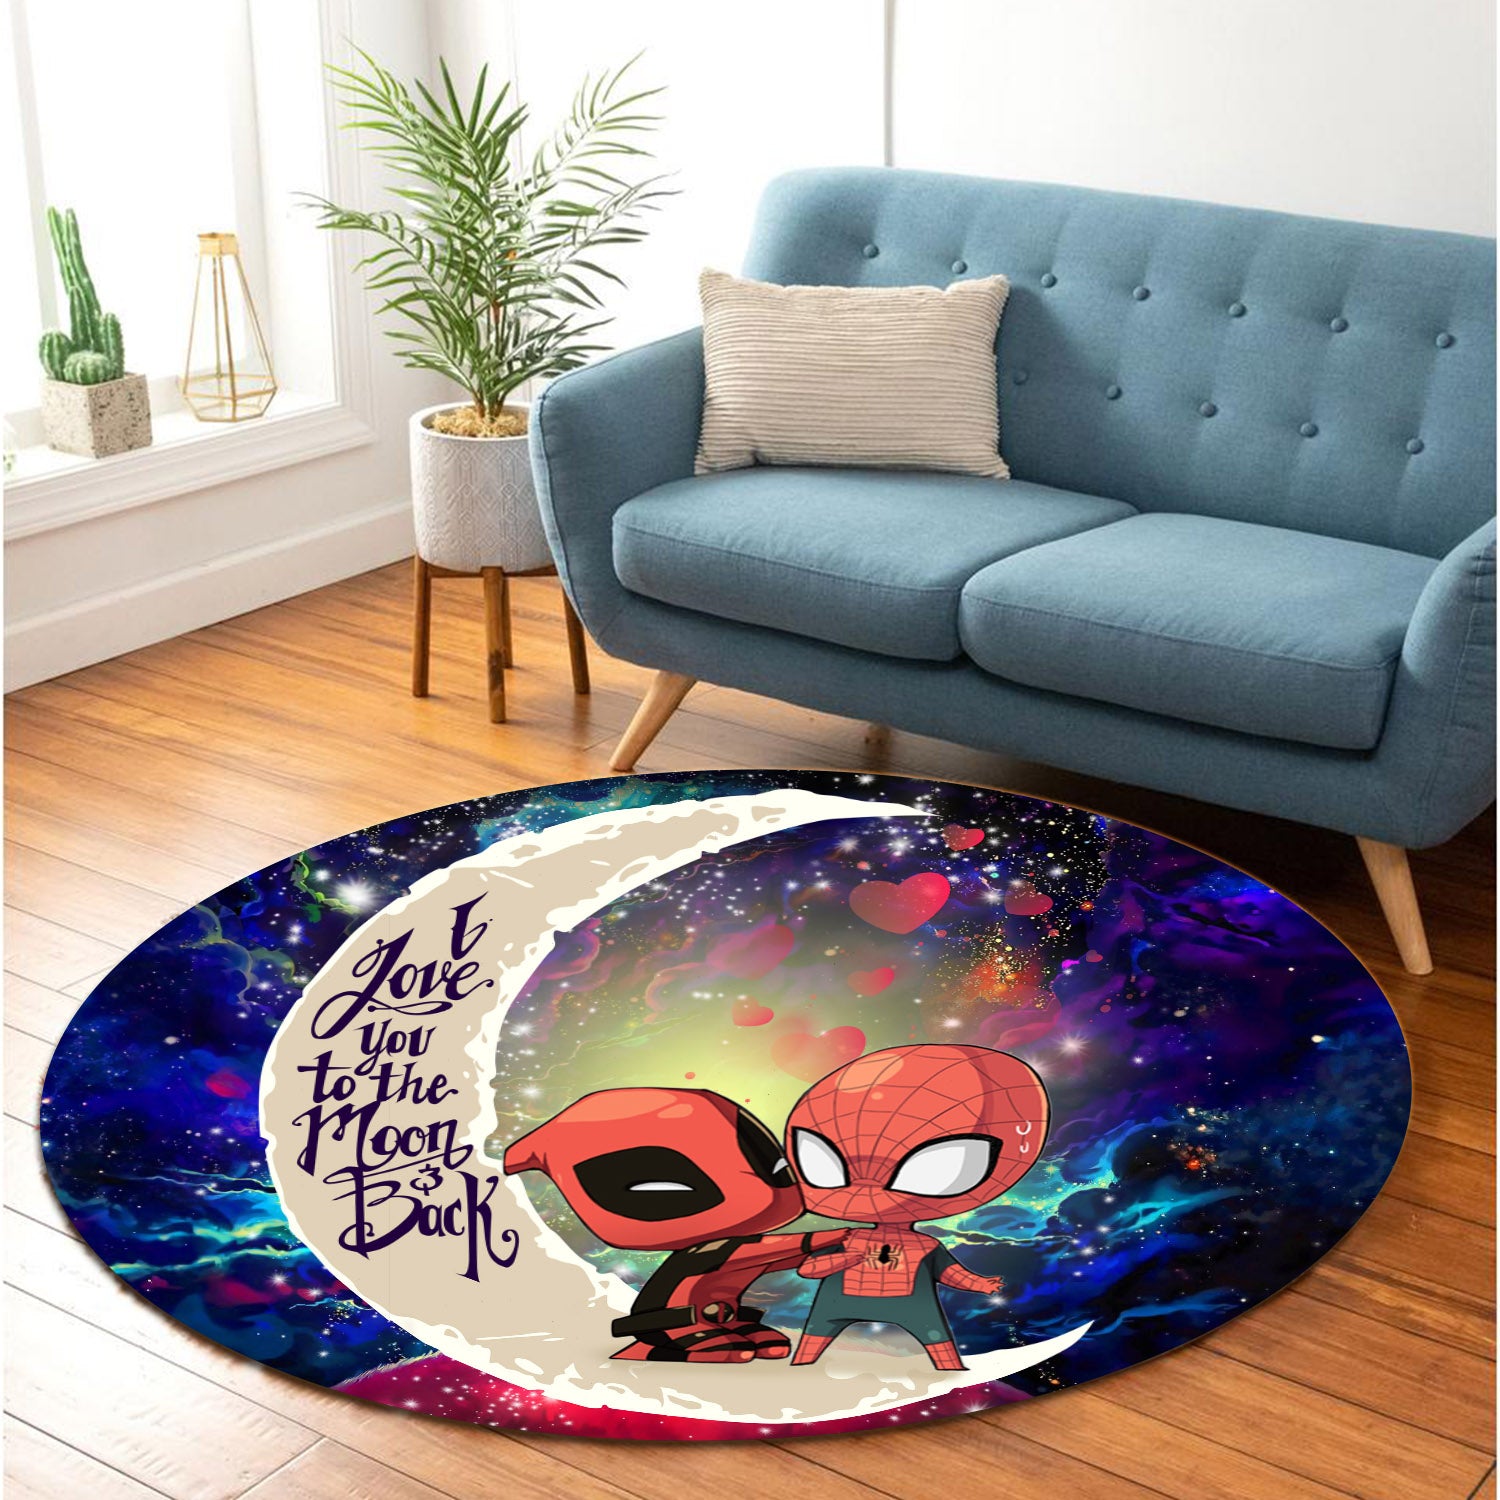 Spiderman And Deadpool Couple Love You To The Moon Galaxy Round Carpet Rug Bedroom Livingroom Home Decor Nearkii